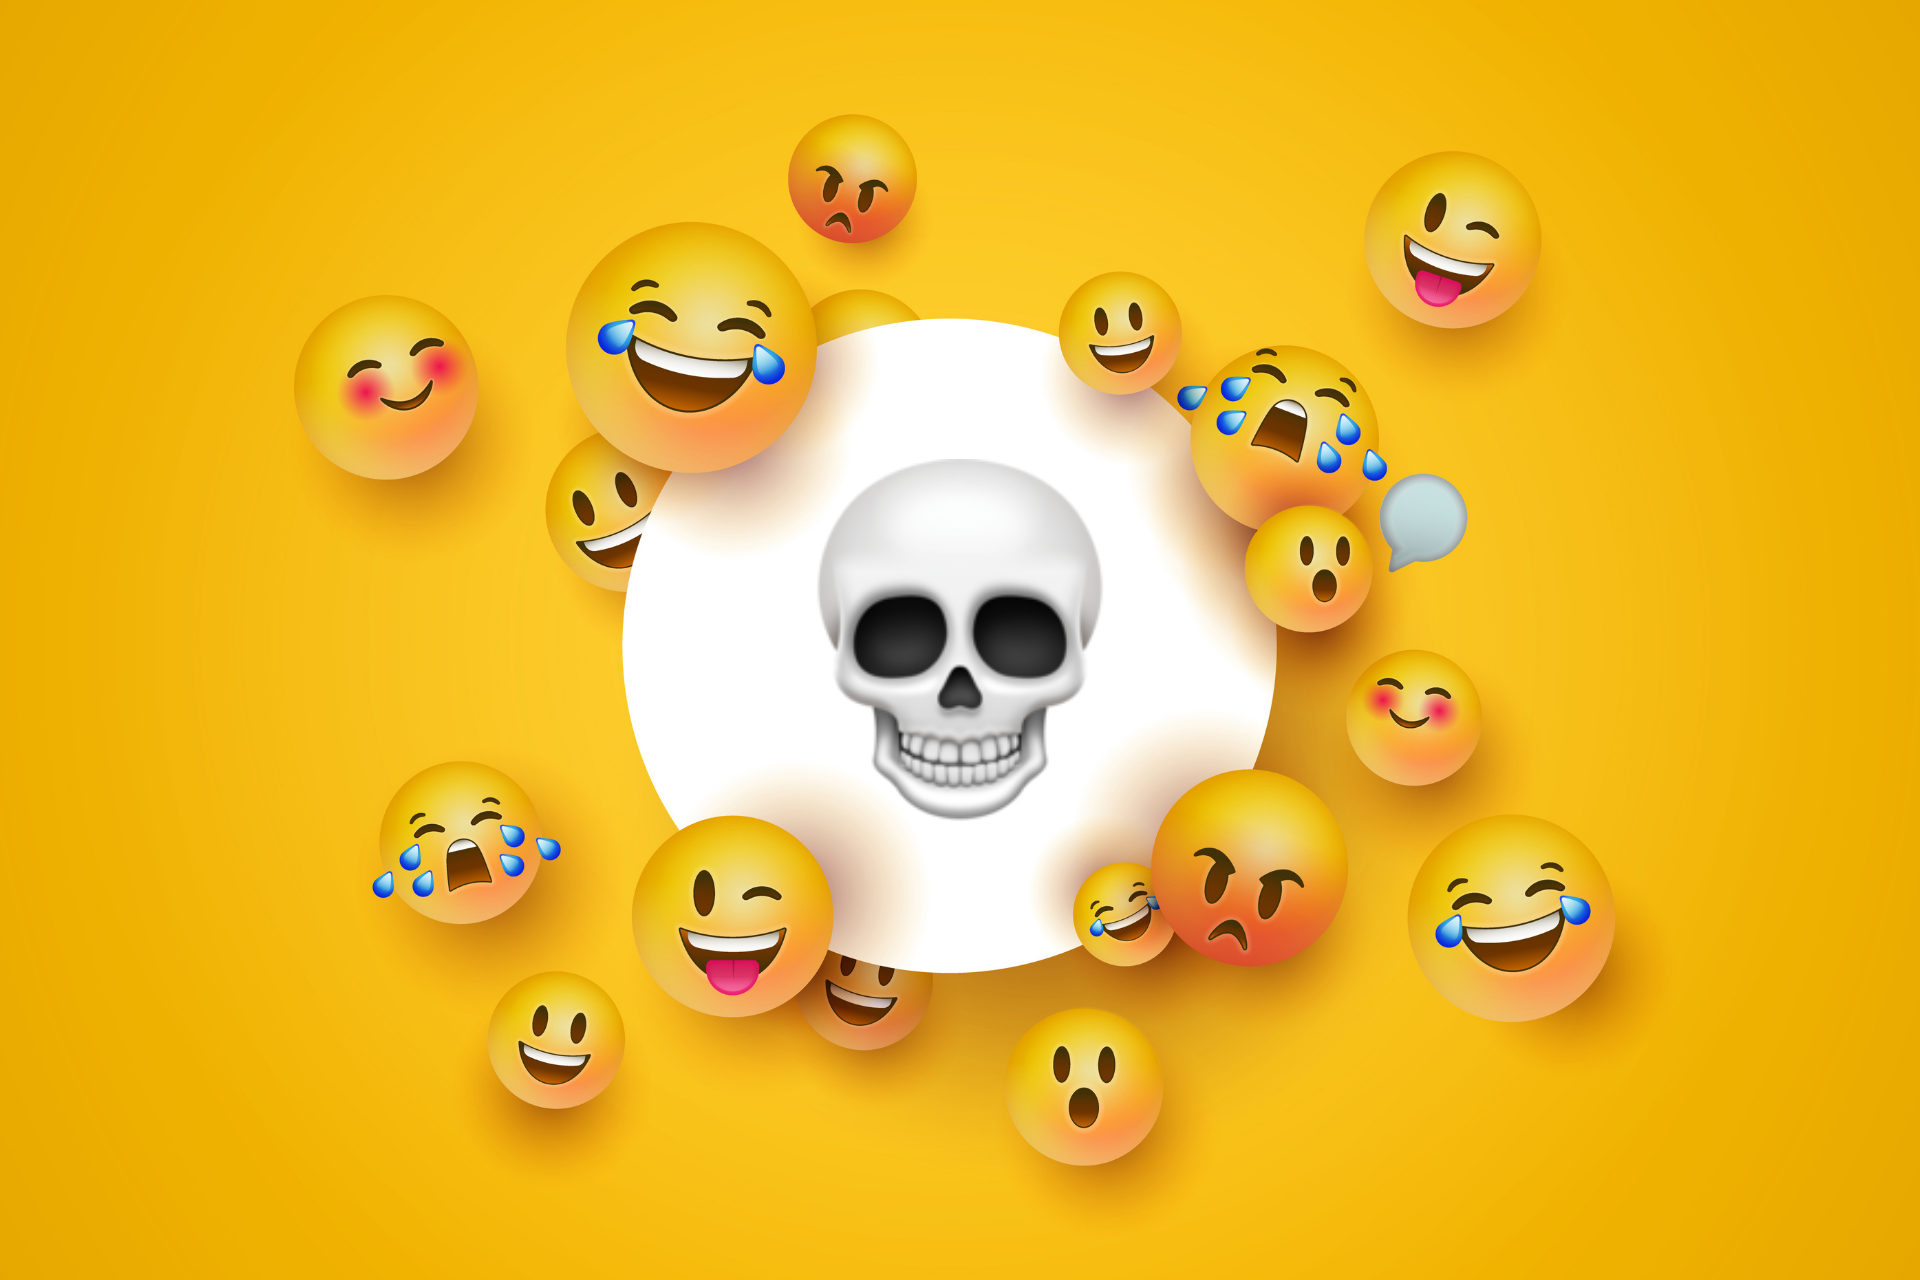 The Laugh Cry Emoji Is Dead. Here's Why That Bothers Us So Much